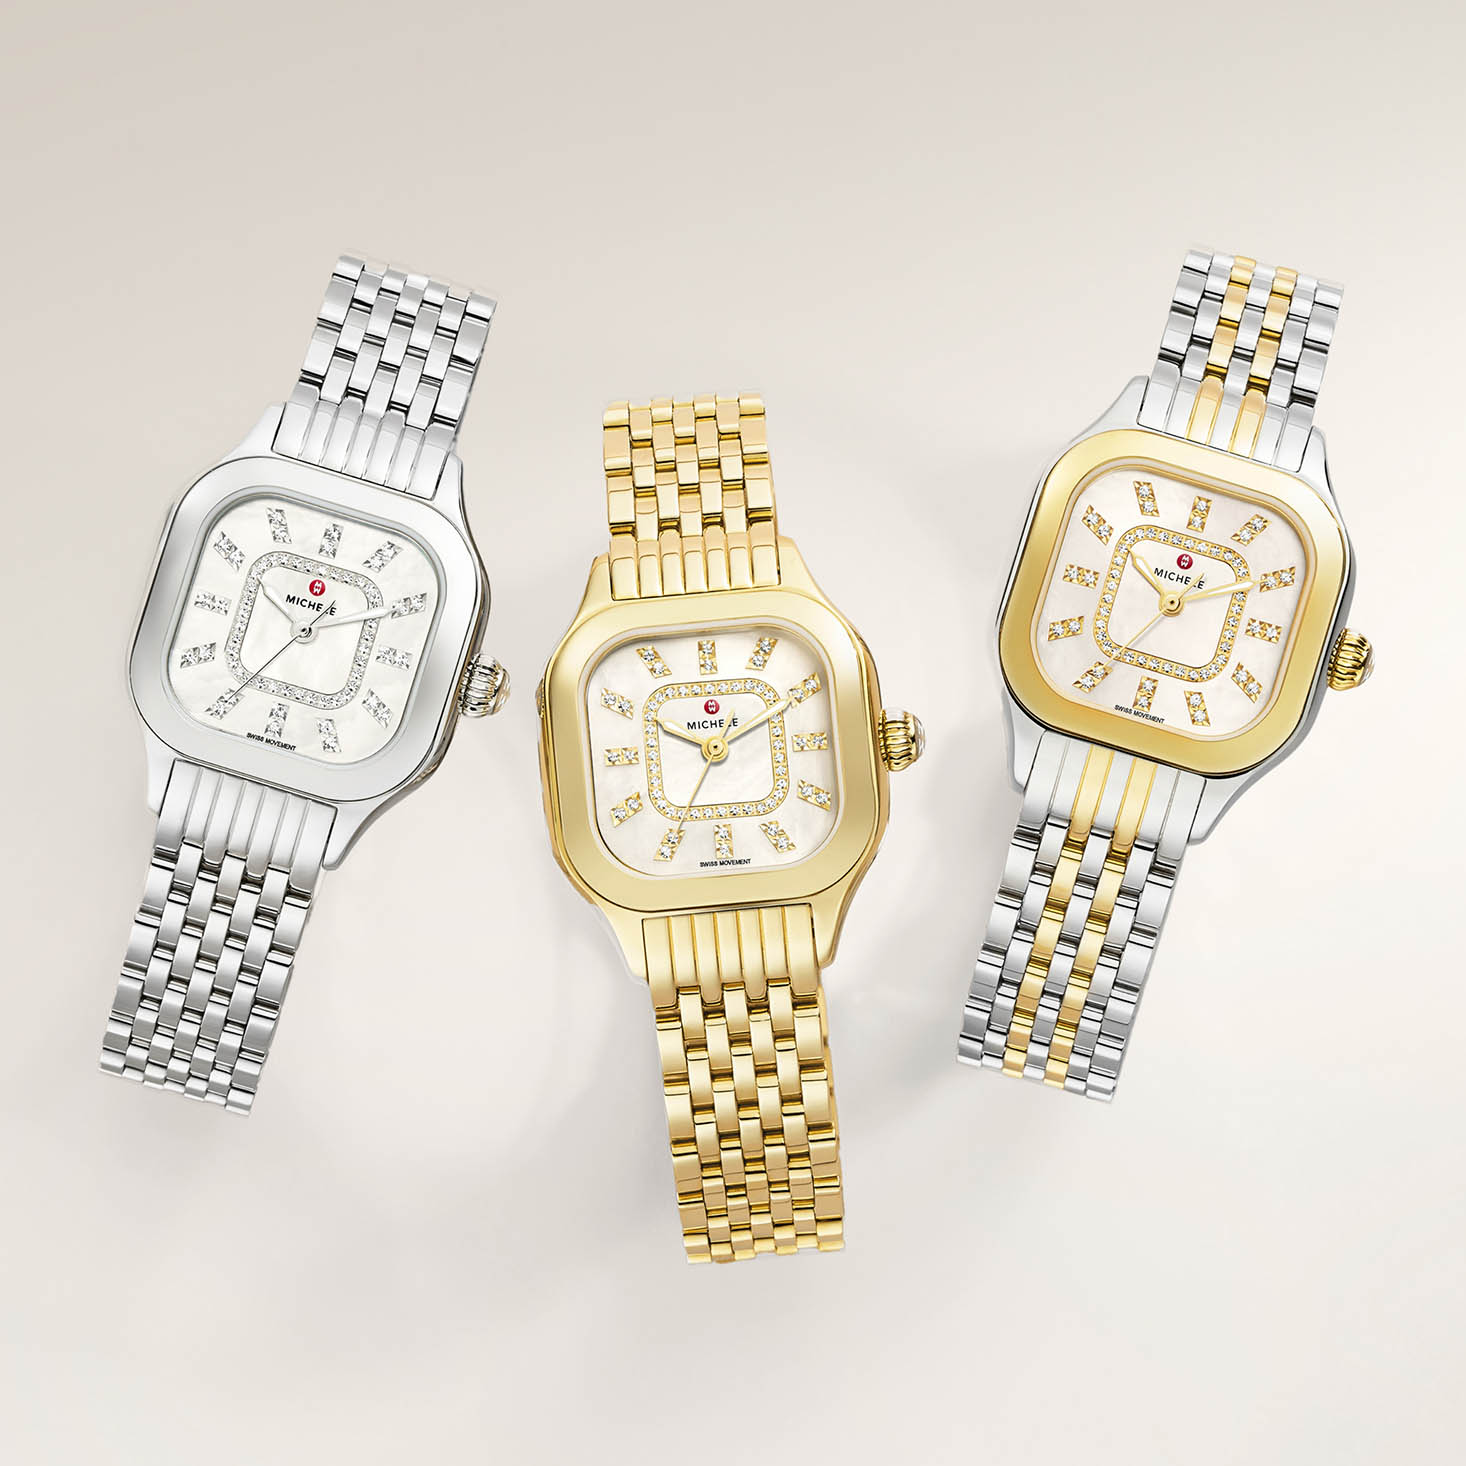 Collection of Meggie watches.